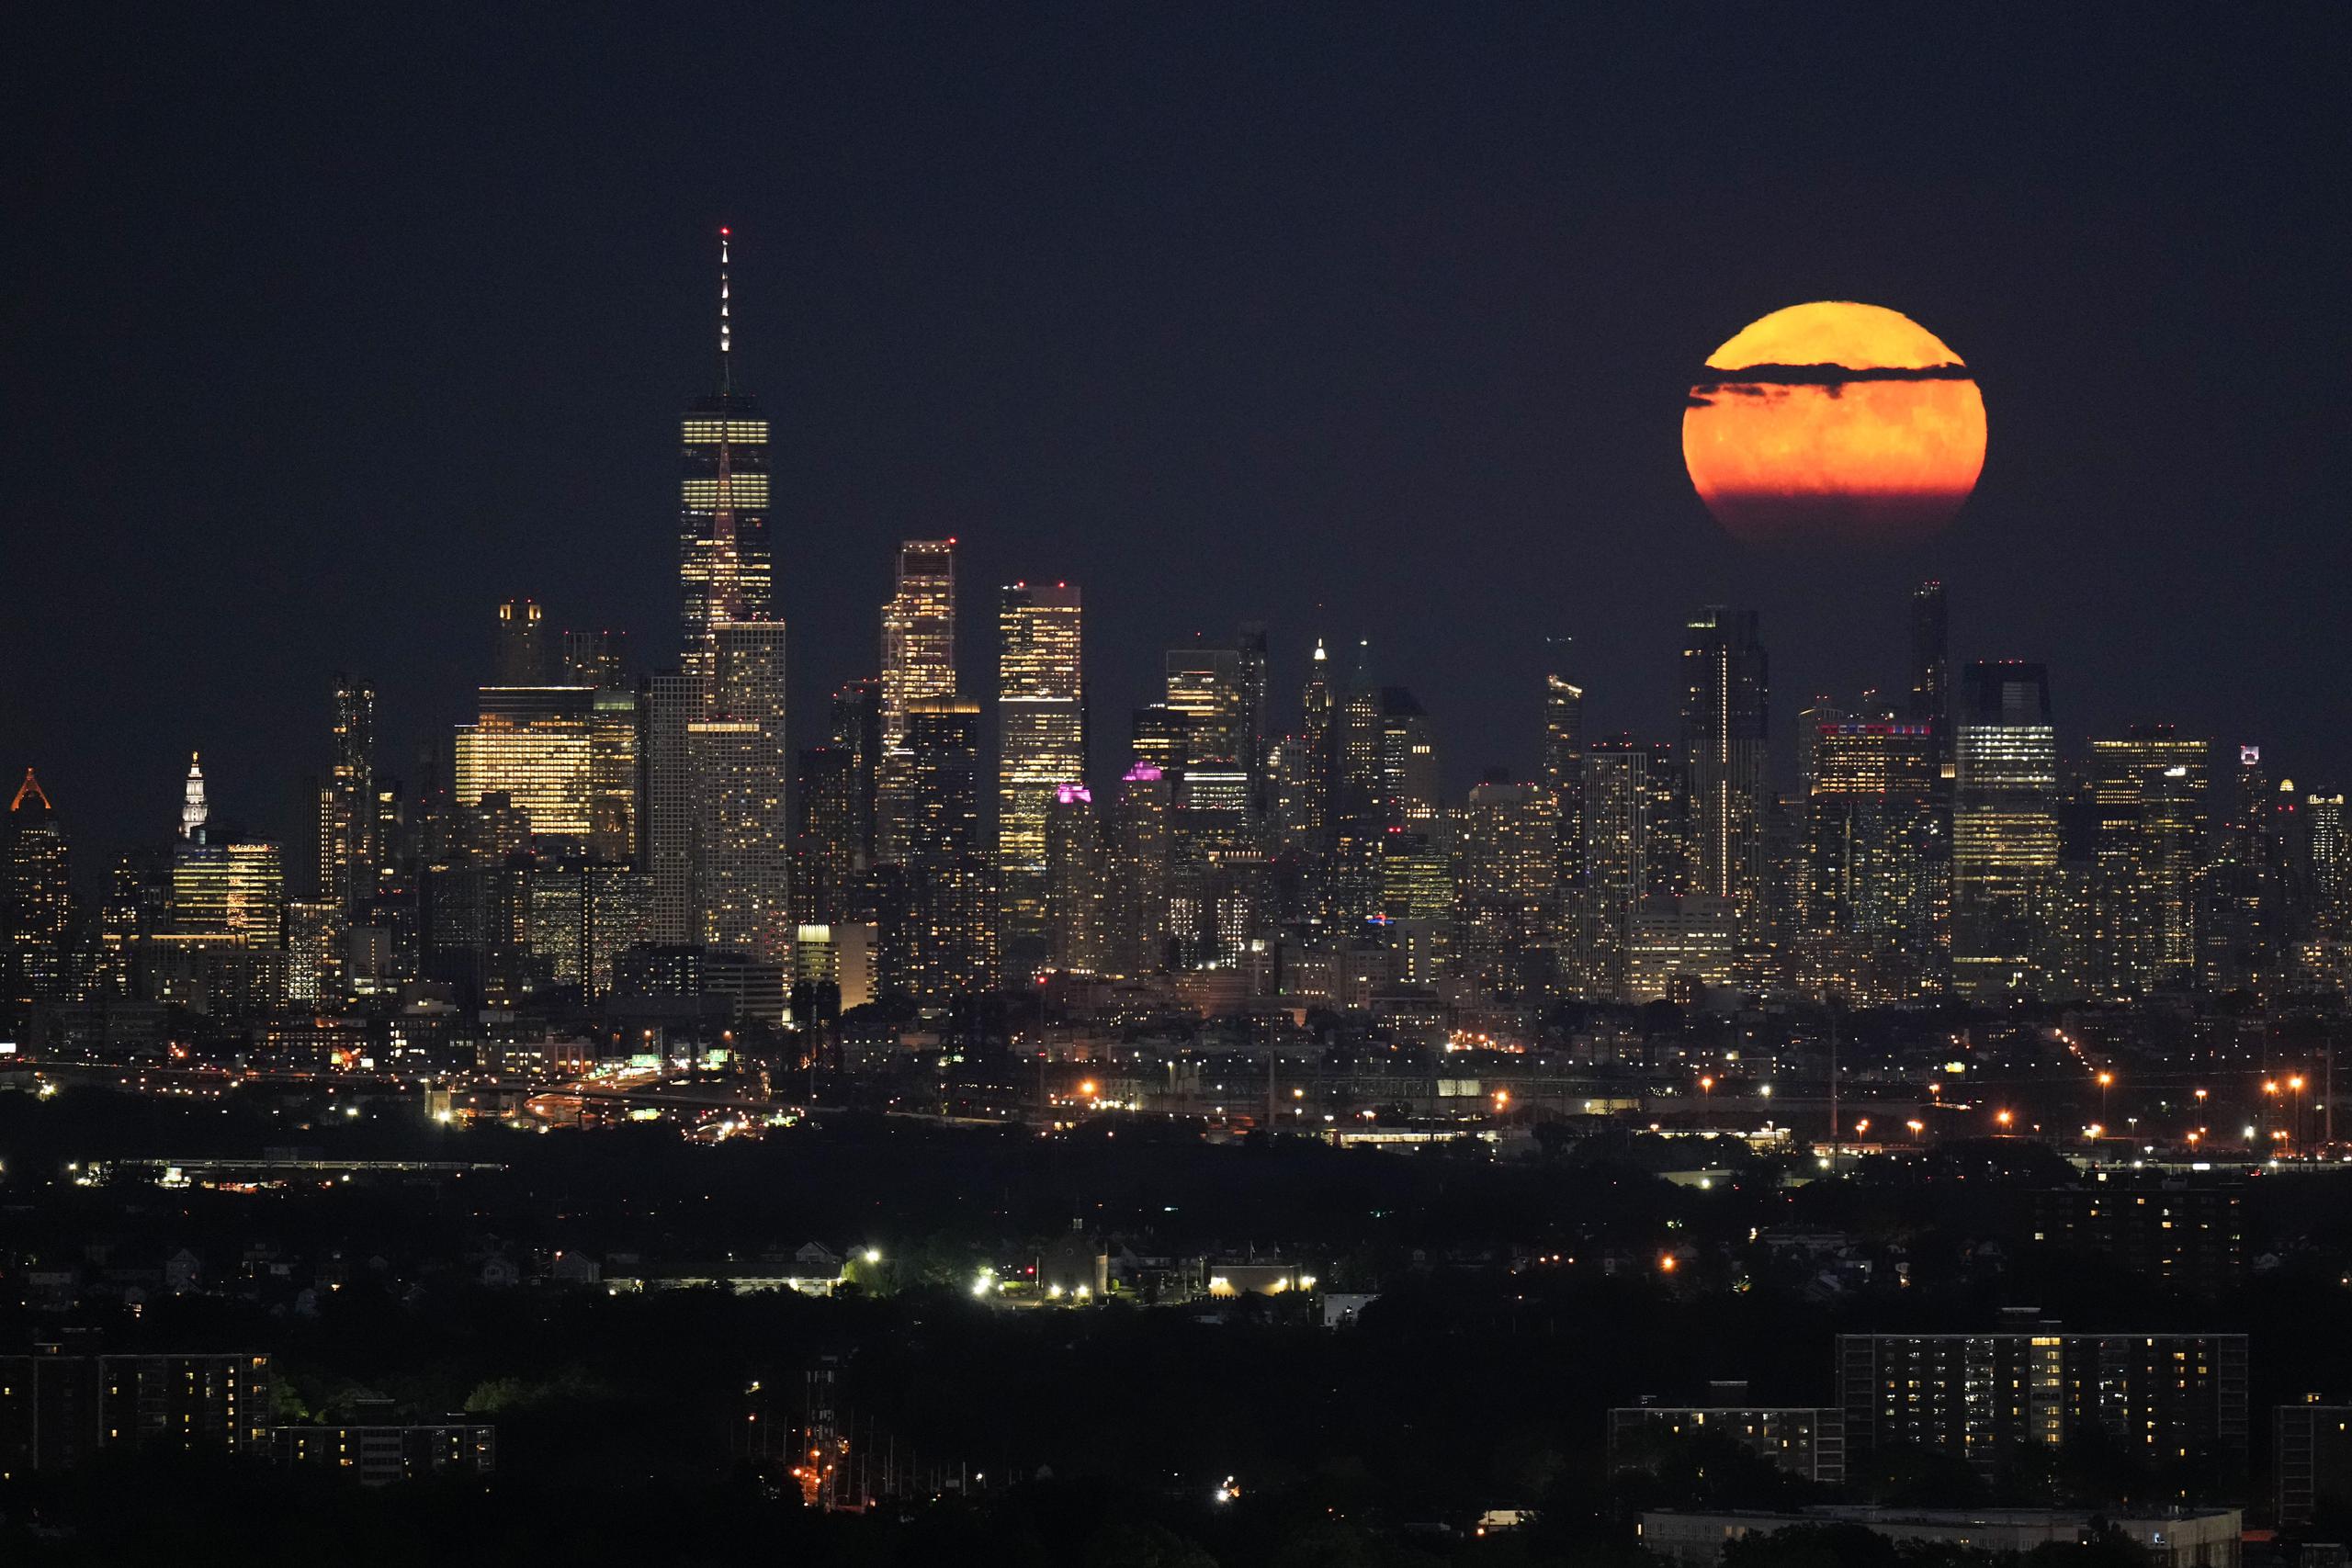 The moon rises through clouds over the skyline of lower Manhattan as seen from West Orange, N.J., Tuesday, Aug. 1, 2023. The first of two supermoons in August graced the skies on Tuesday. A supermoon is broadly defined as a full moon that is closer to the Earth than normal. That makes it appear slightly brighter and bigger in the sky. (AP Photo/Seth Wenig)